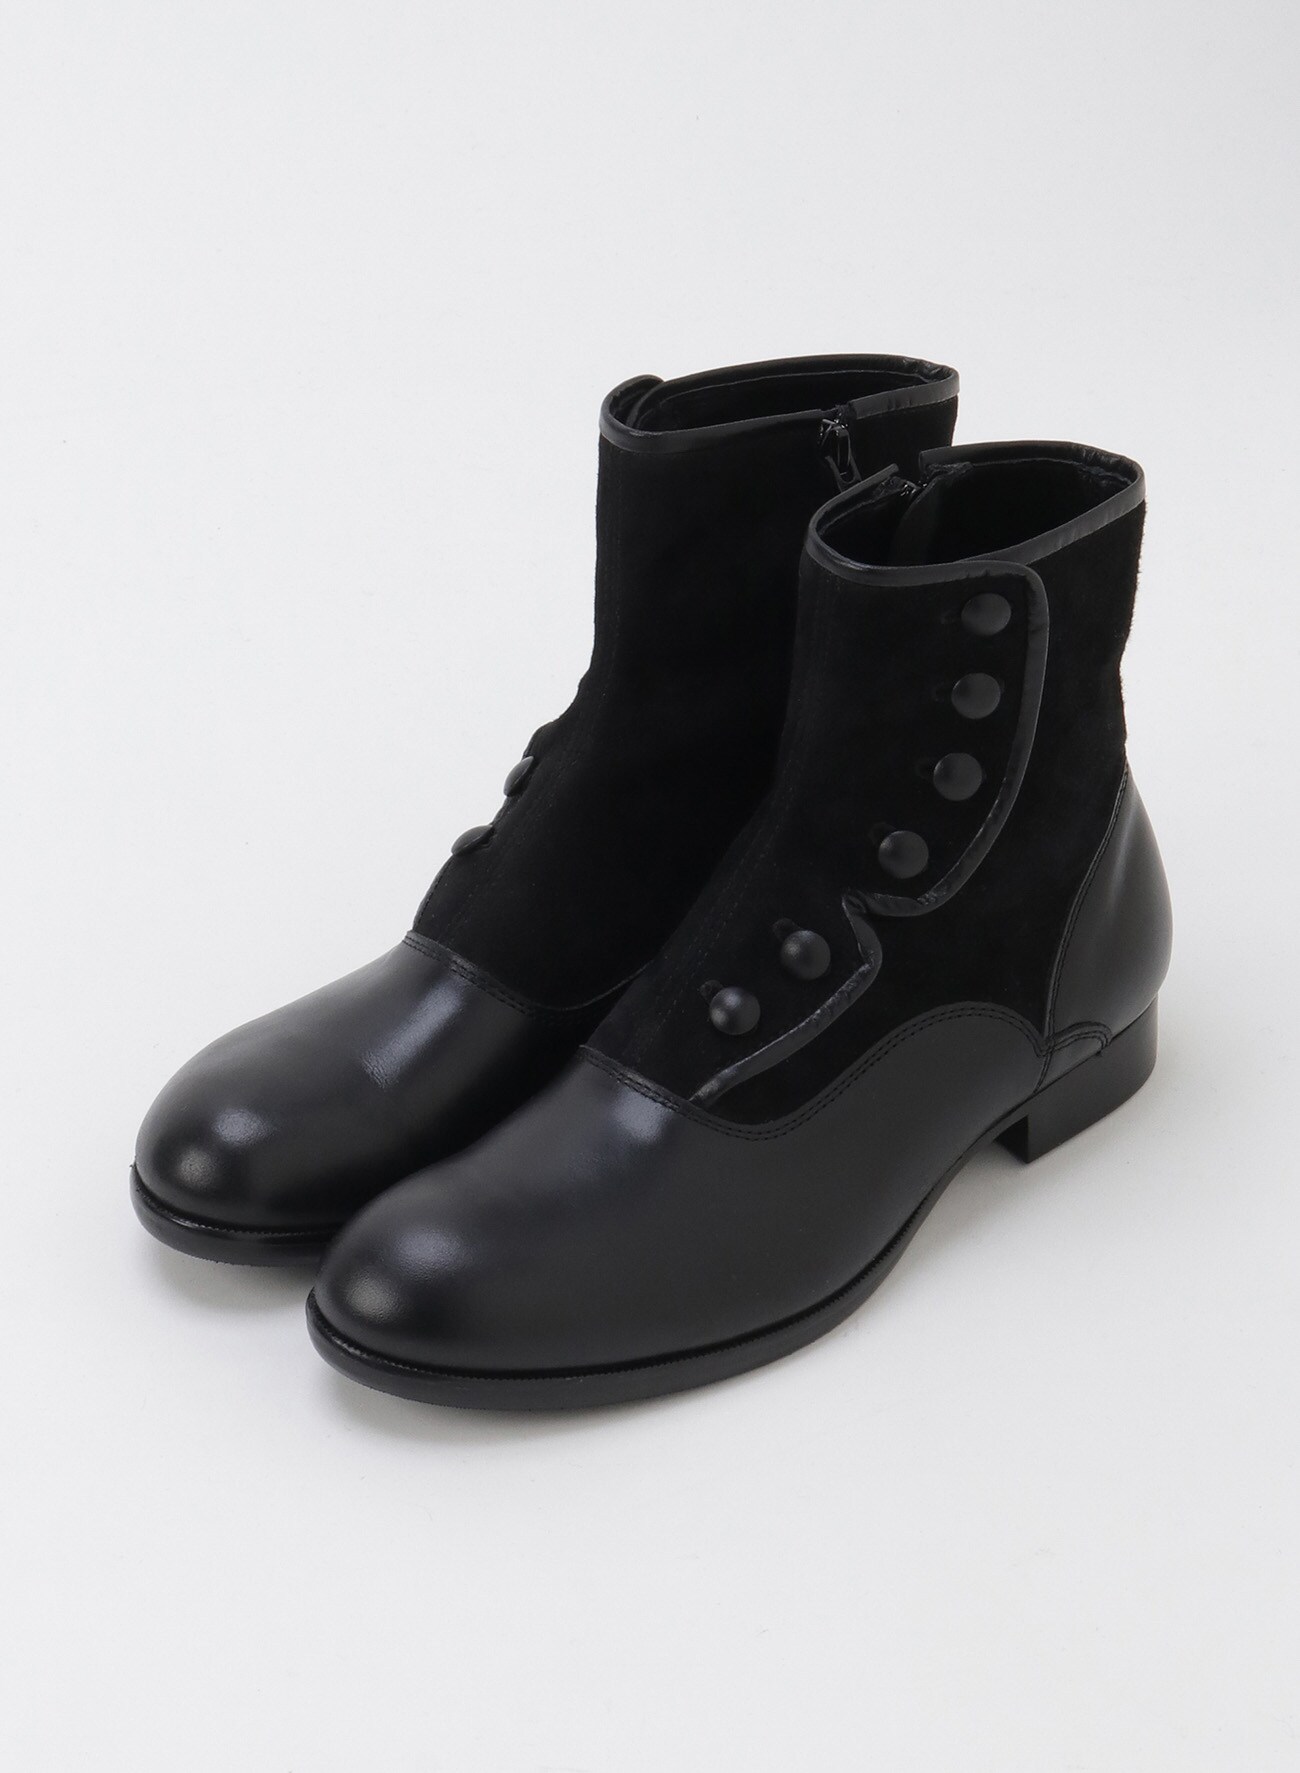 KIP & SHEEP LEATHER COMBI BUTTON BOOTS